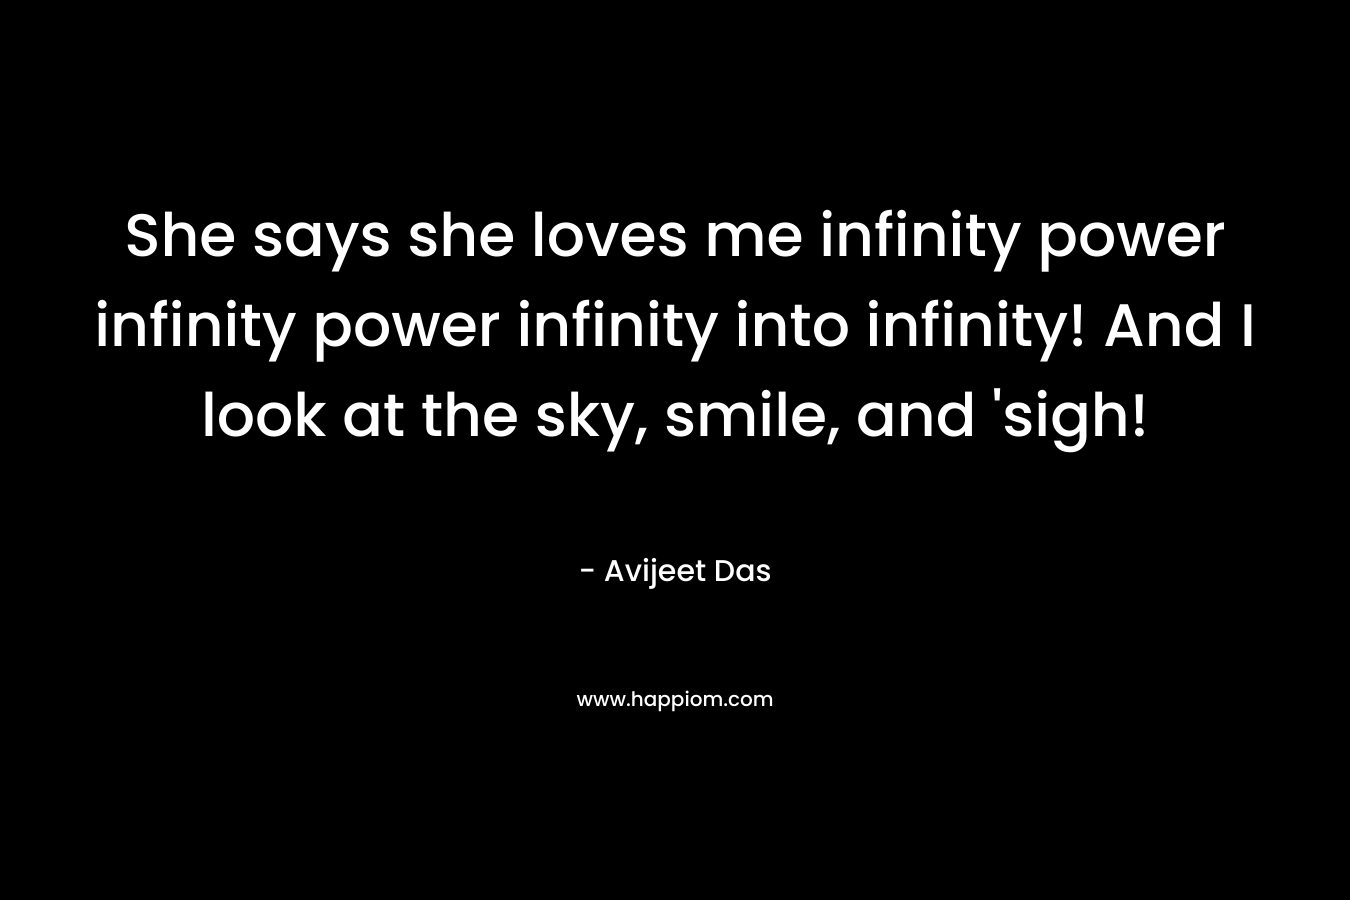 She says she loves me infinity power infinity power infinity into infinity! And I look at the sky, smile, and 'sigh!